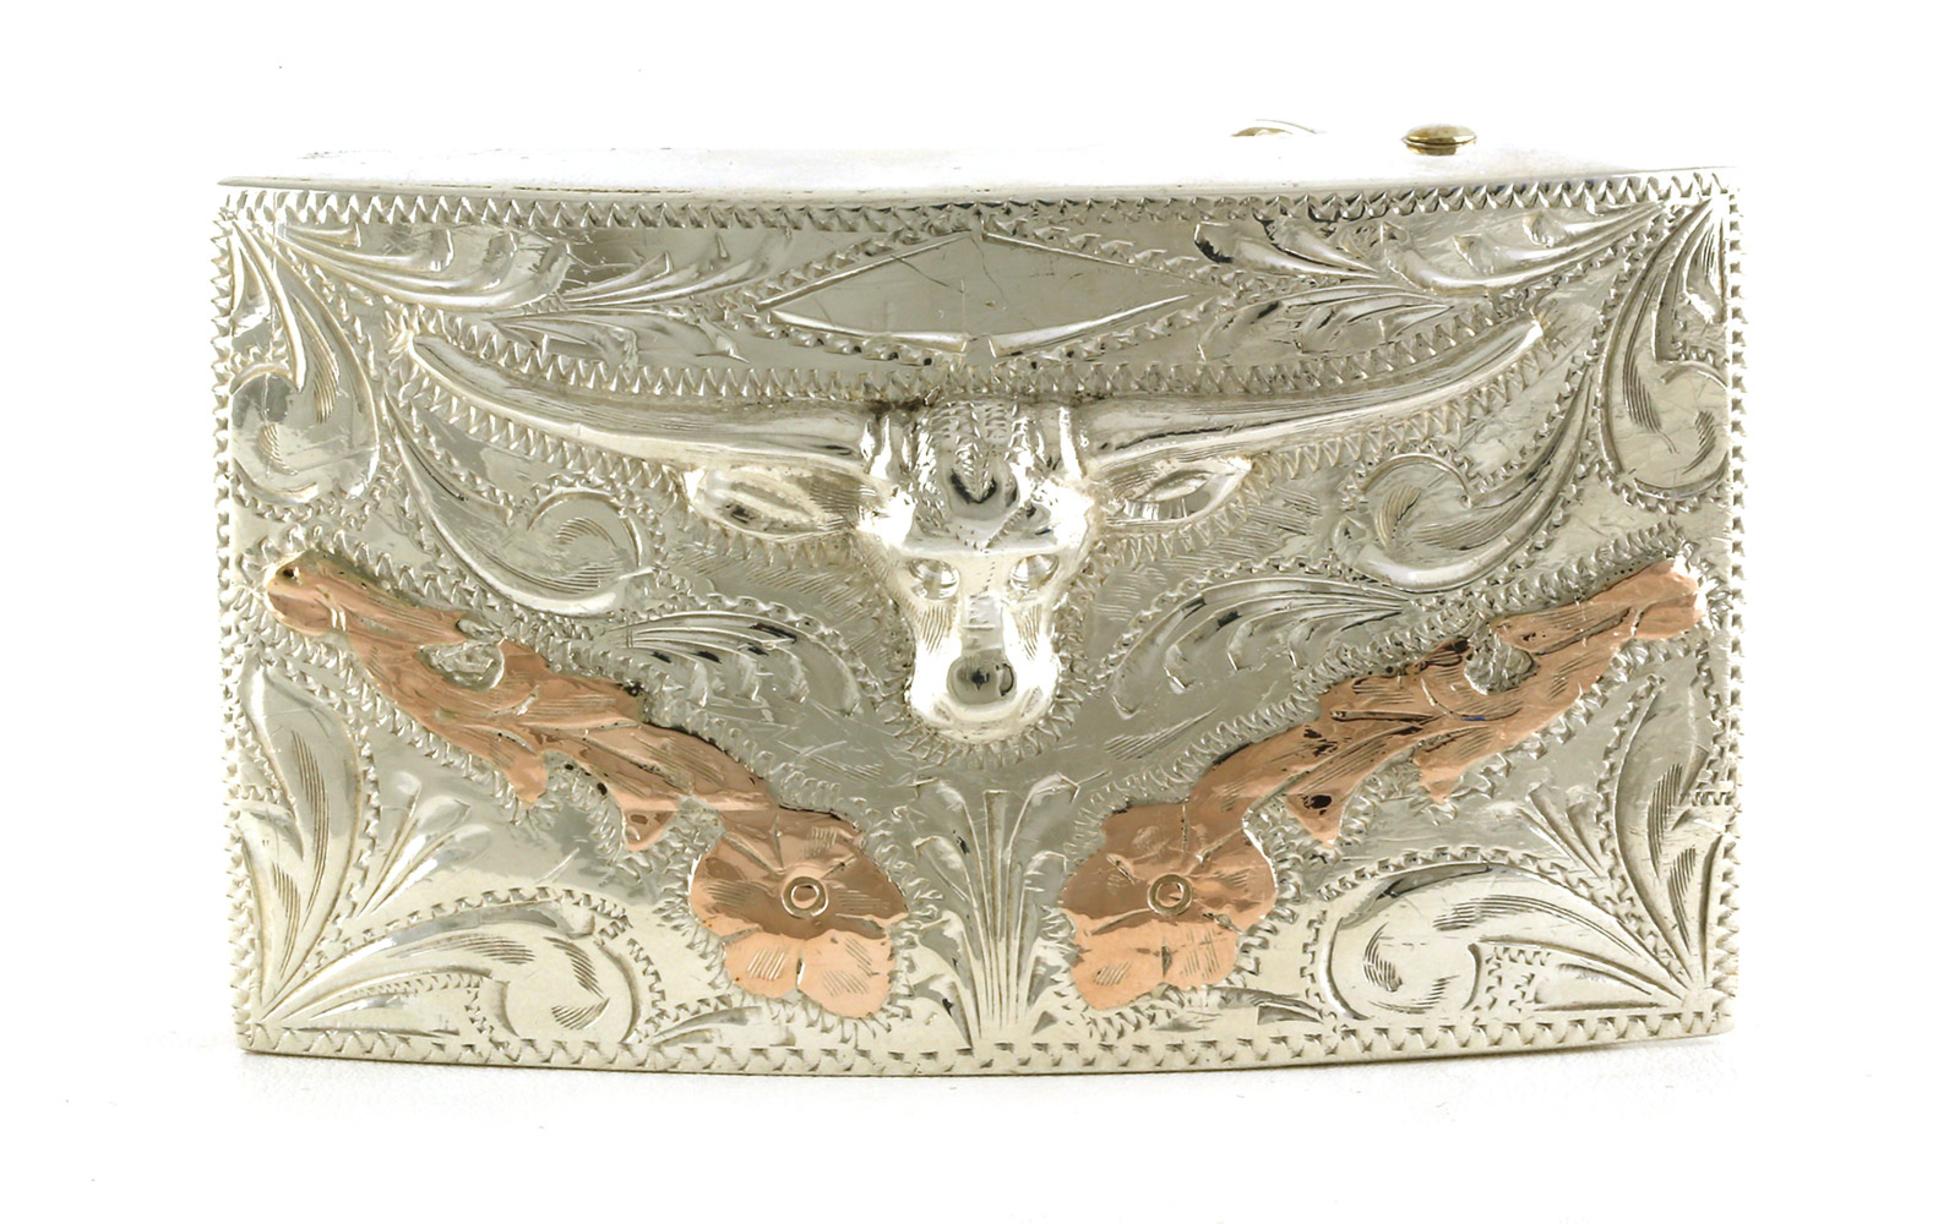 Estate Piece: Longhorn Belt Buckle with Engraved Details in Two-tone Rose Gold and Sterling Silver